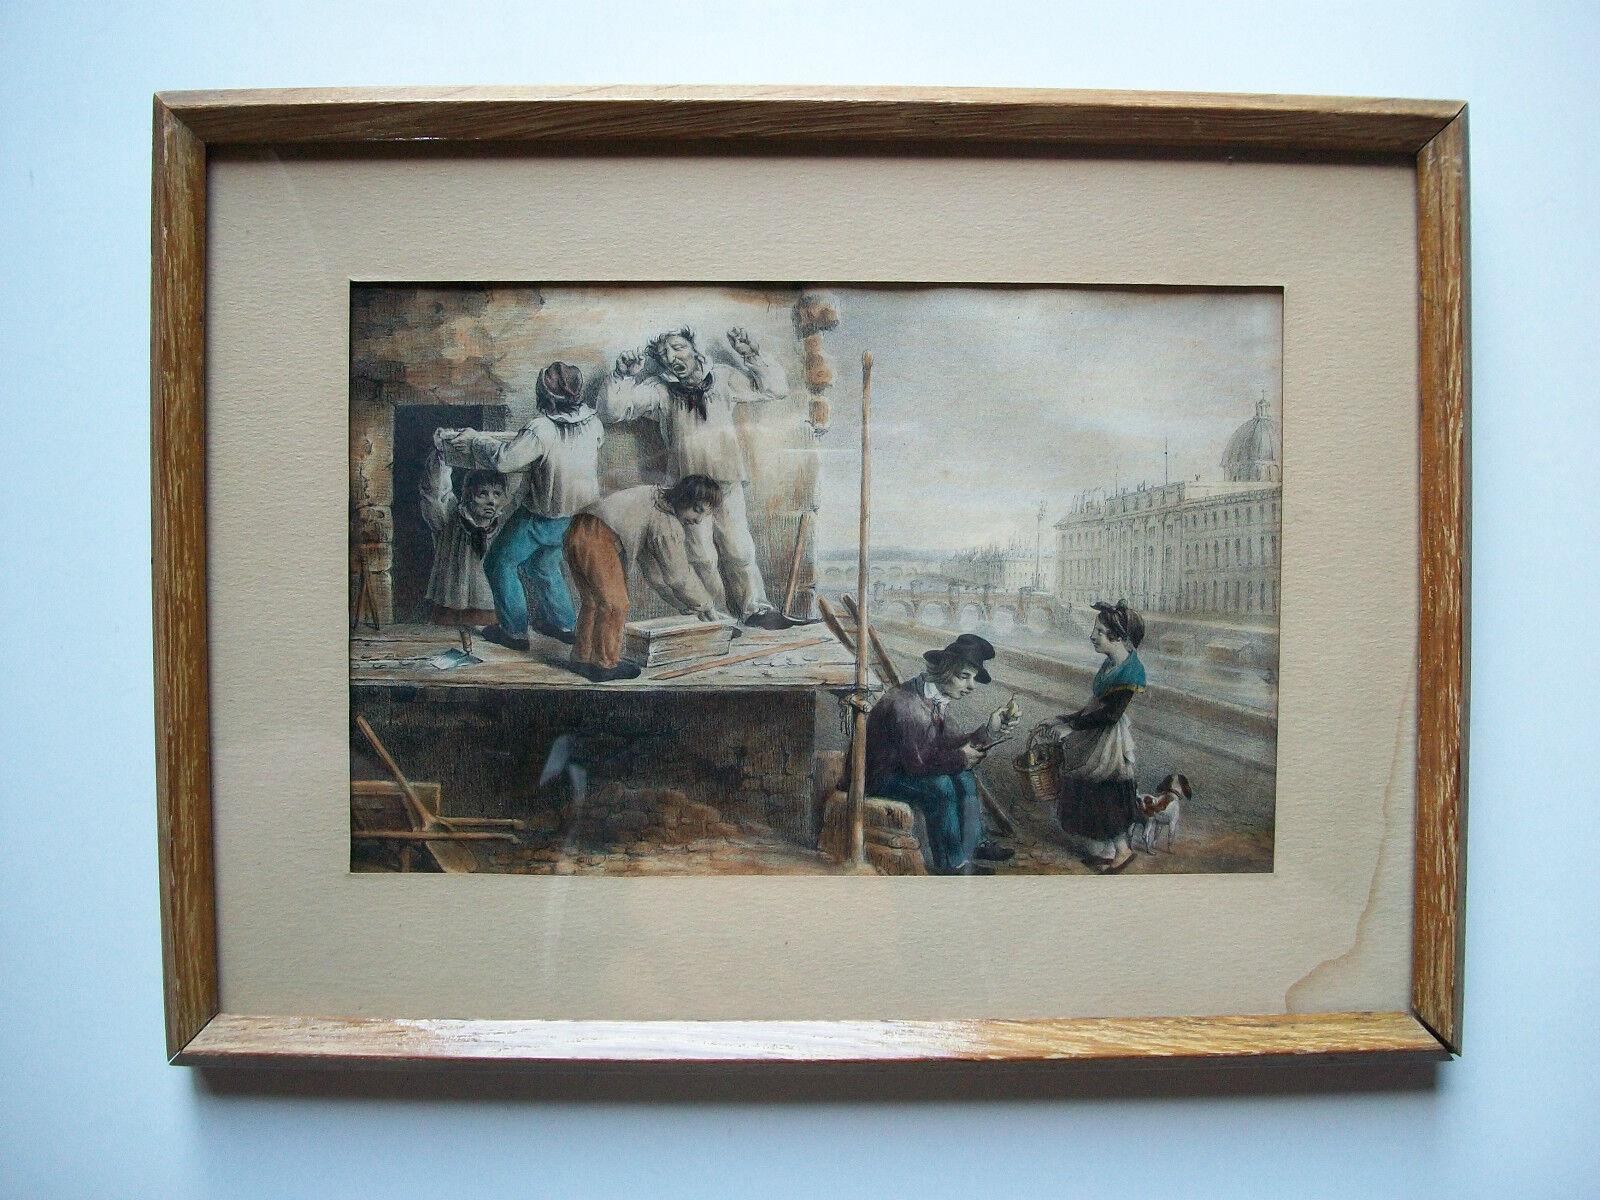 Antique hand colored engraving - early morning street urchins by the River Thames in London - solid oak frame - old English paper label verso - vintage acidic matte board behind glass - United Kingdom - circa 1880.

Excellent antique condition -